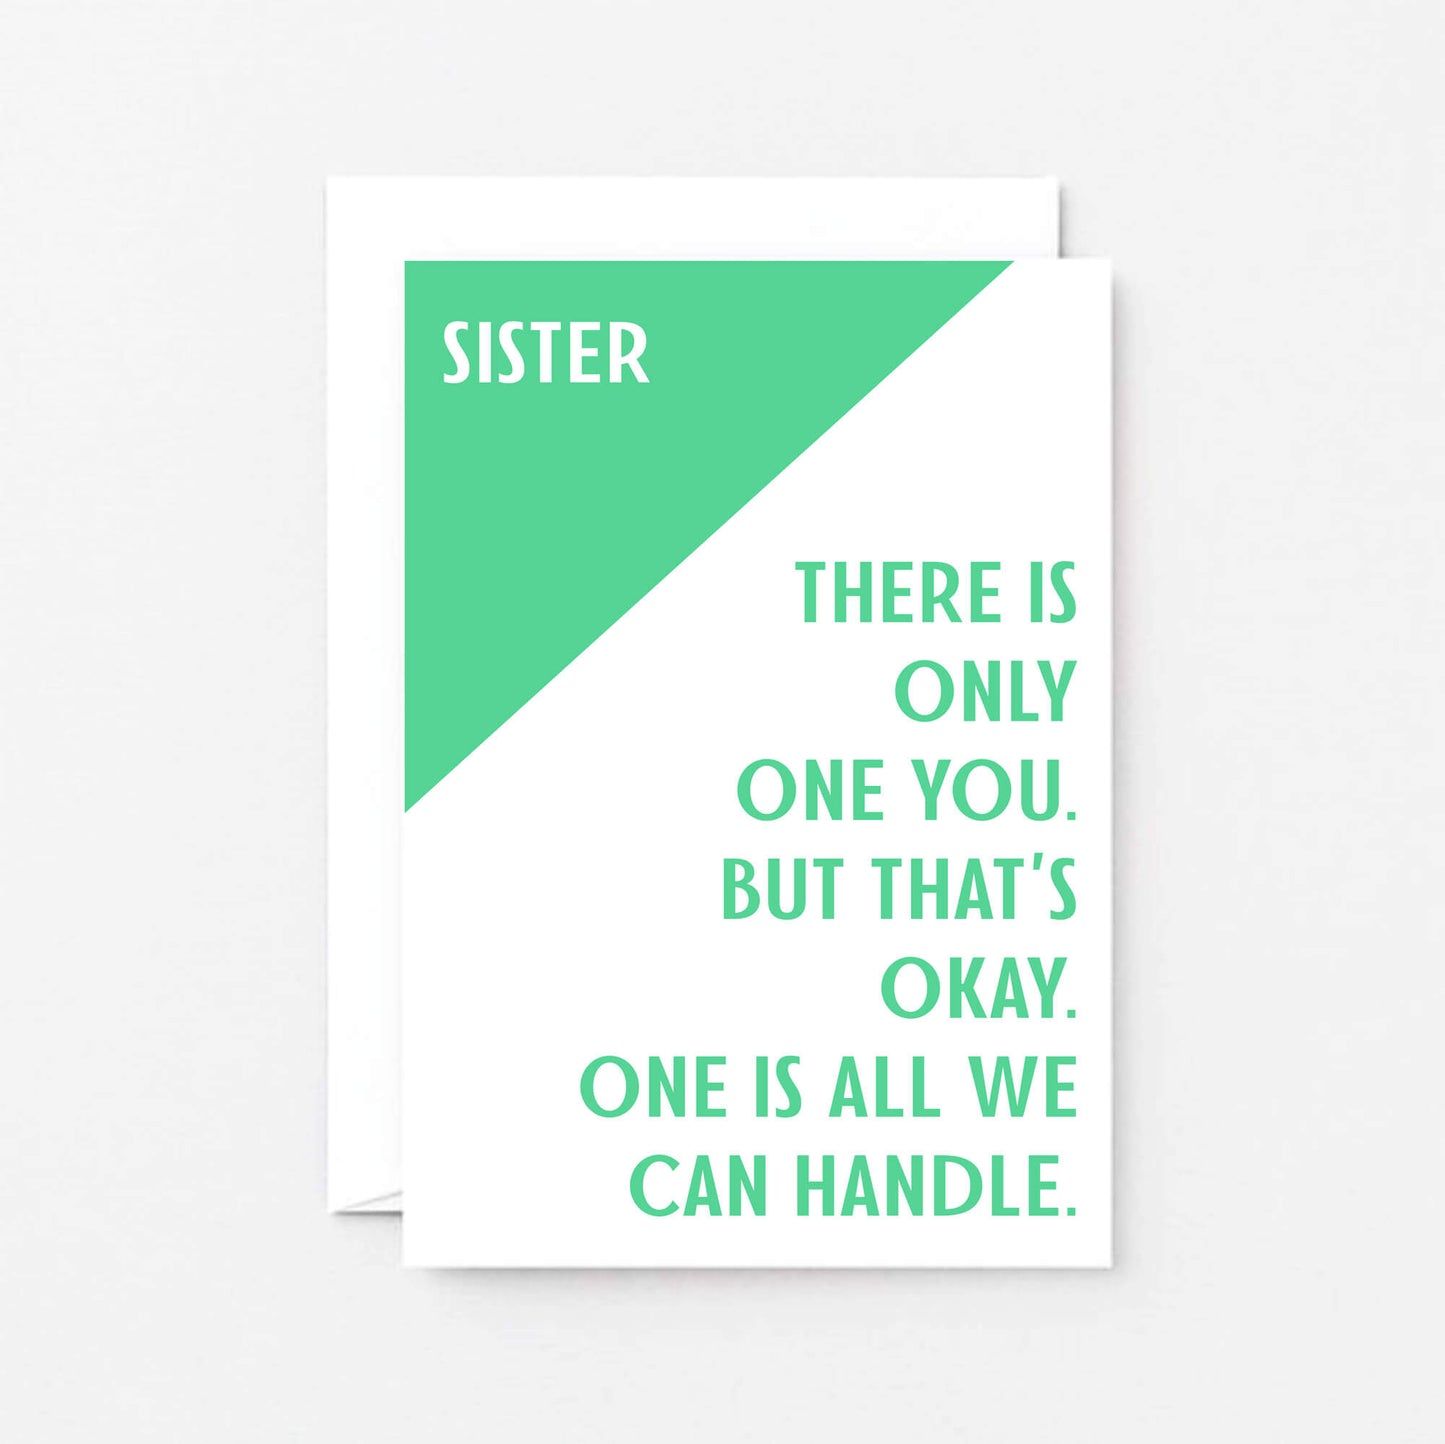 Sister Card by SixElevenCreations. Reads Sister There is only one you. But that's okay. One is all we can handle. Product Code SE3042A6